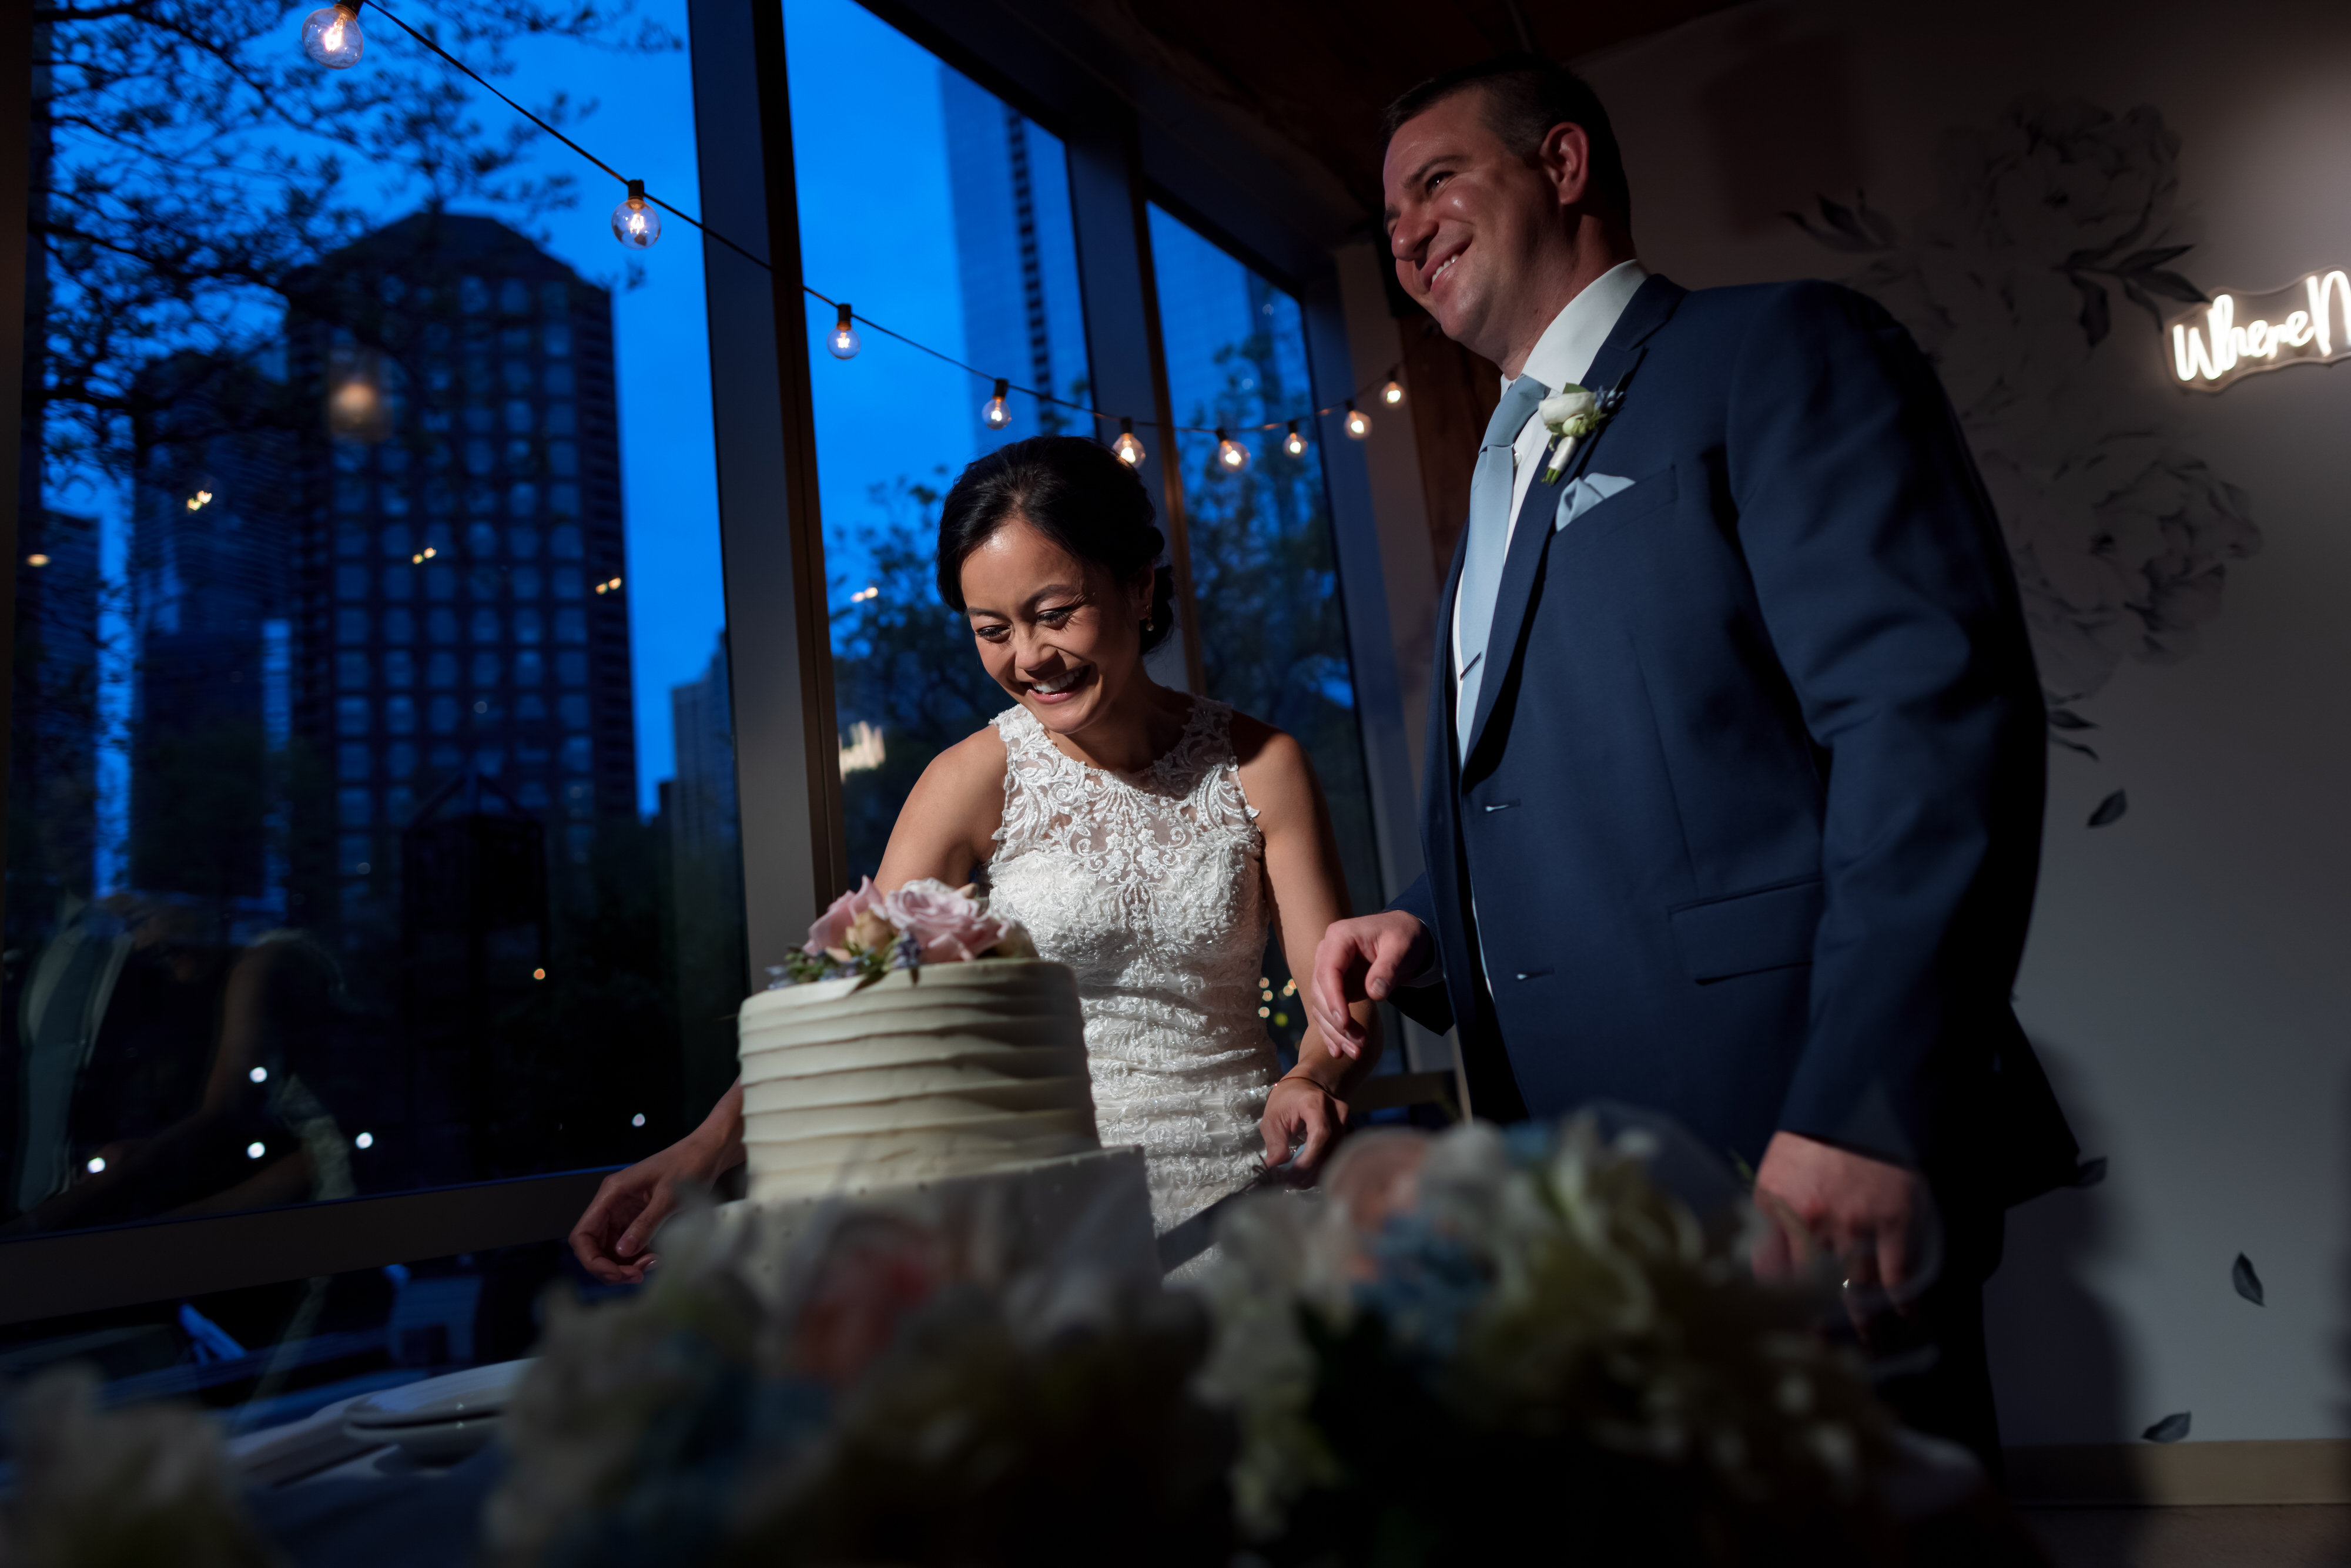 bride and groom cut cake during wedding reception at Pinstripes Chicago